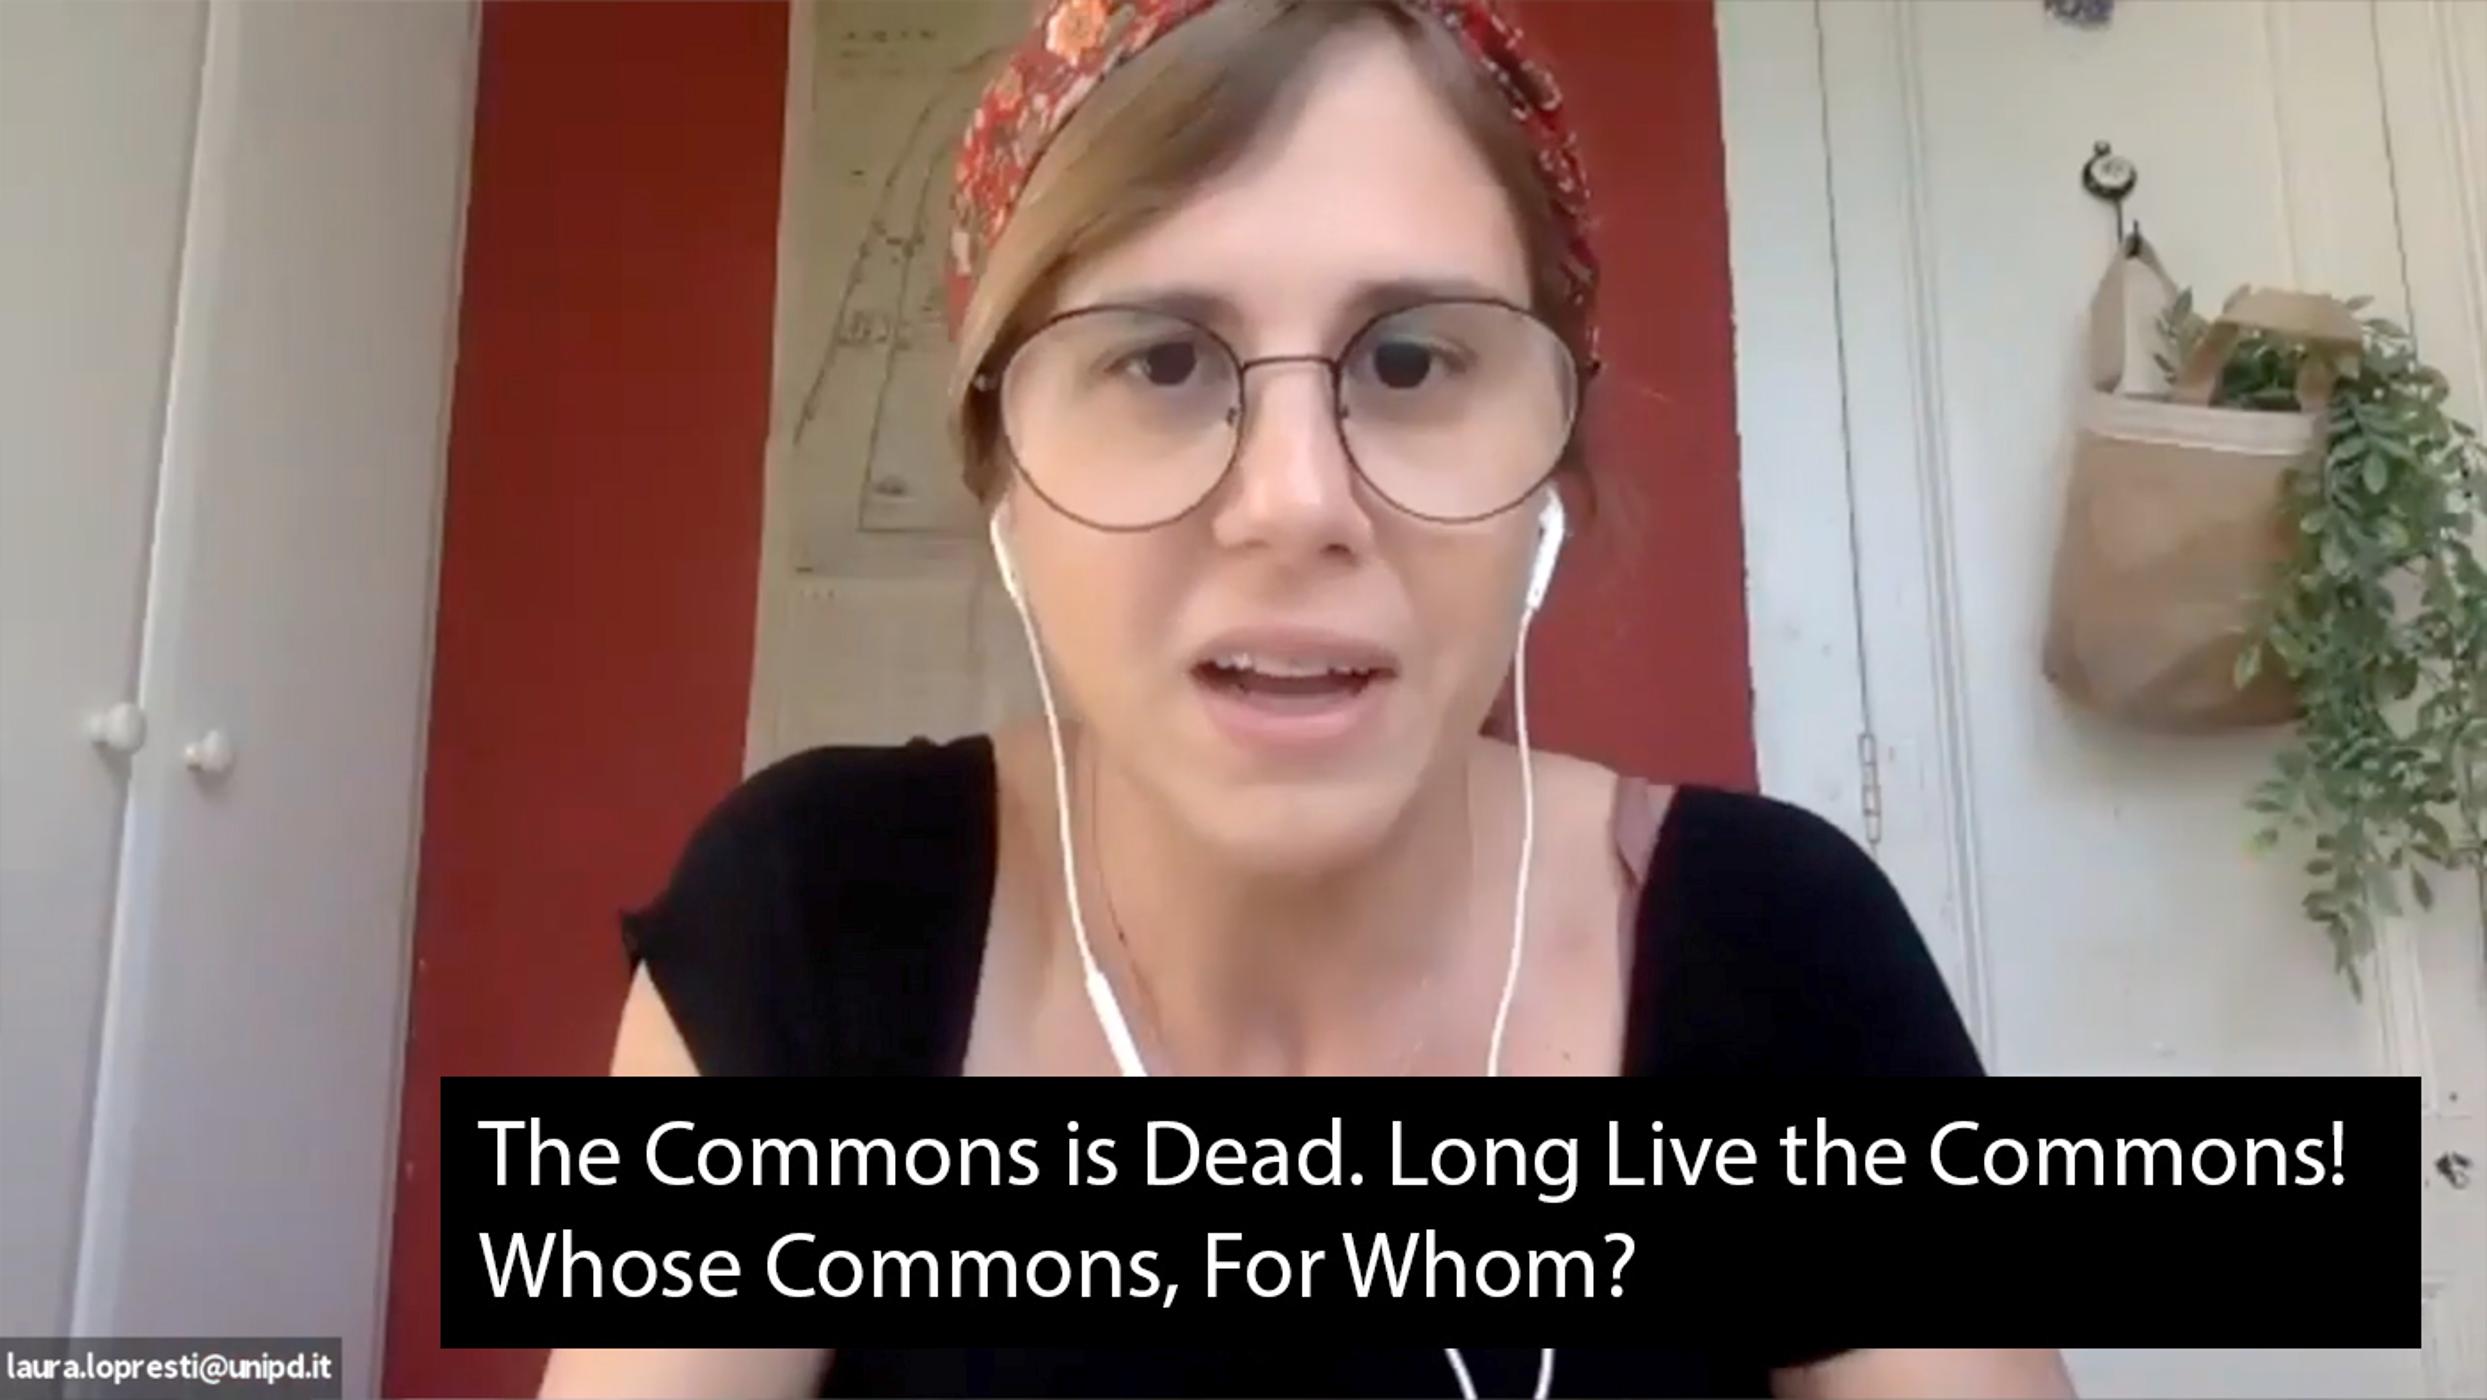 The Commons is Dead. Long Live the Commons! - 13 June 2020 - Panel 2: Whose Commons, For Whom?